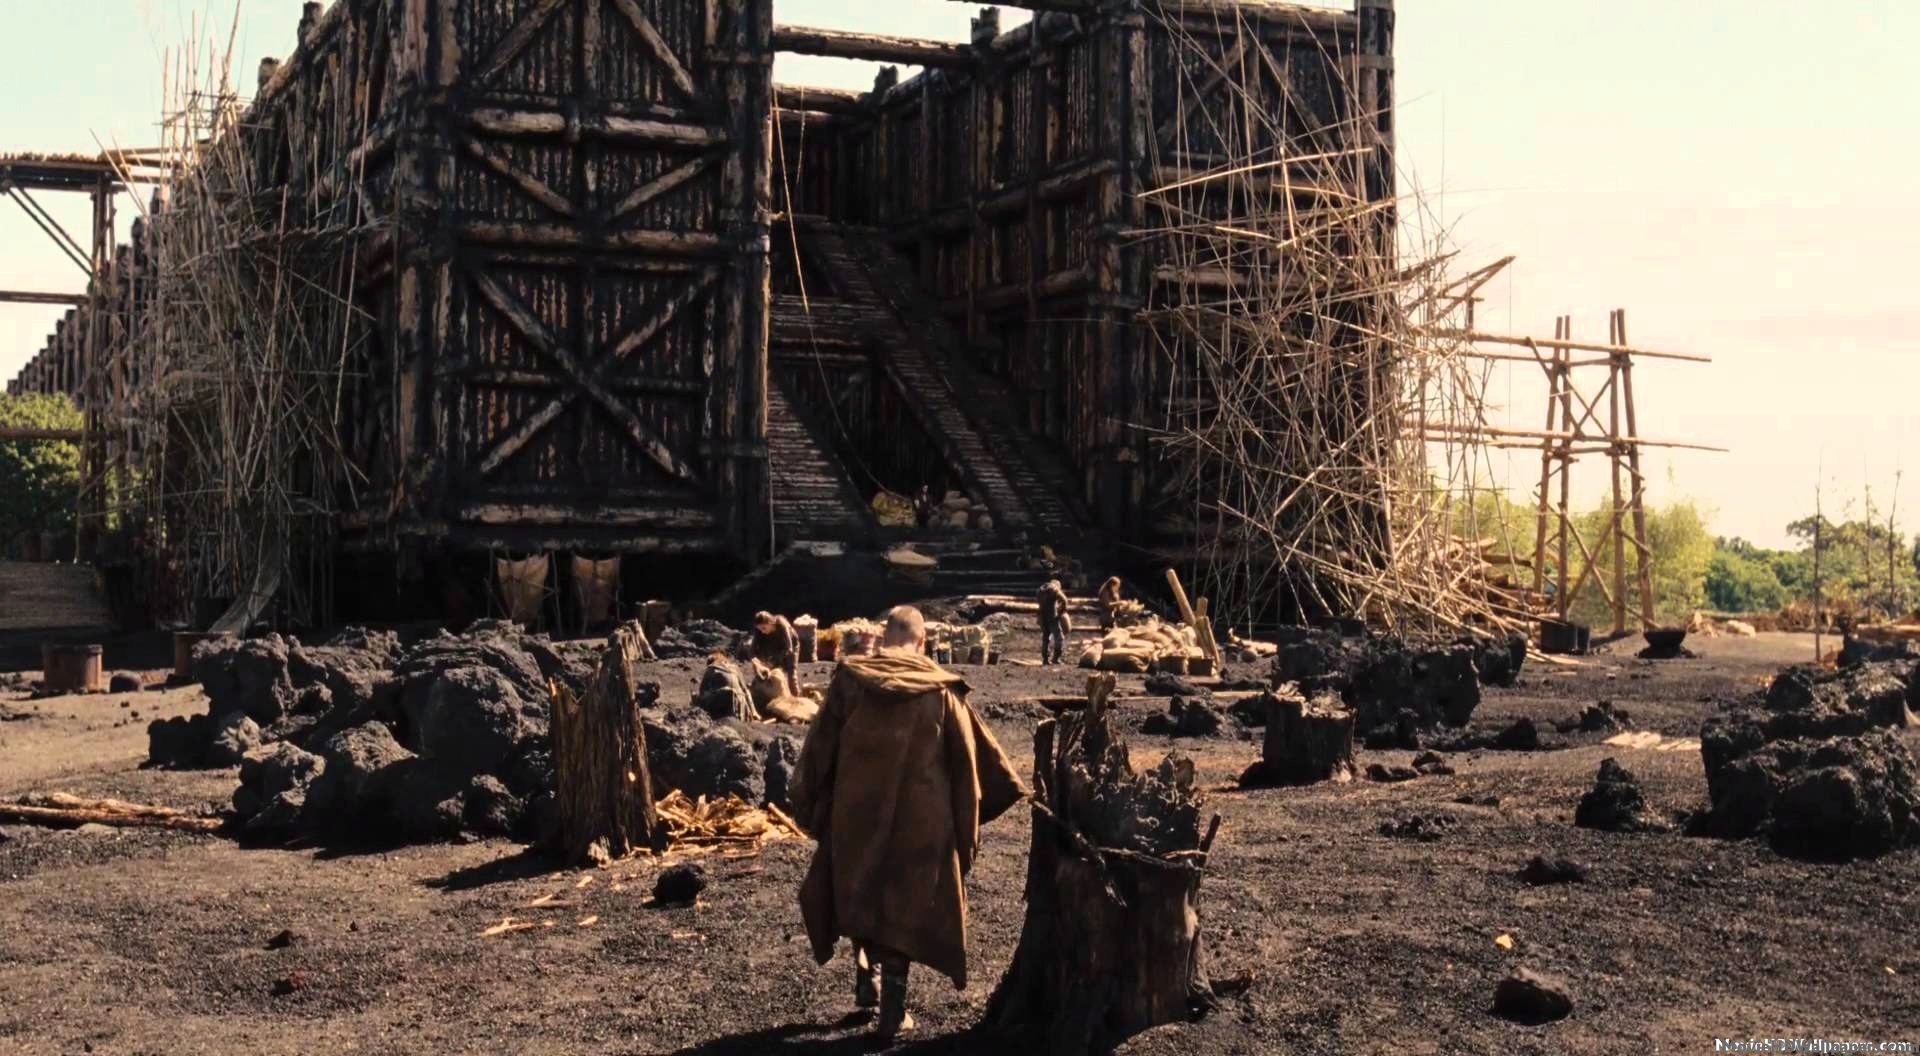 The Arc as depicted in the upcoming film starring Russell Crowe as Noah